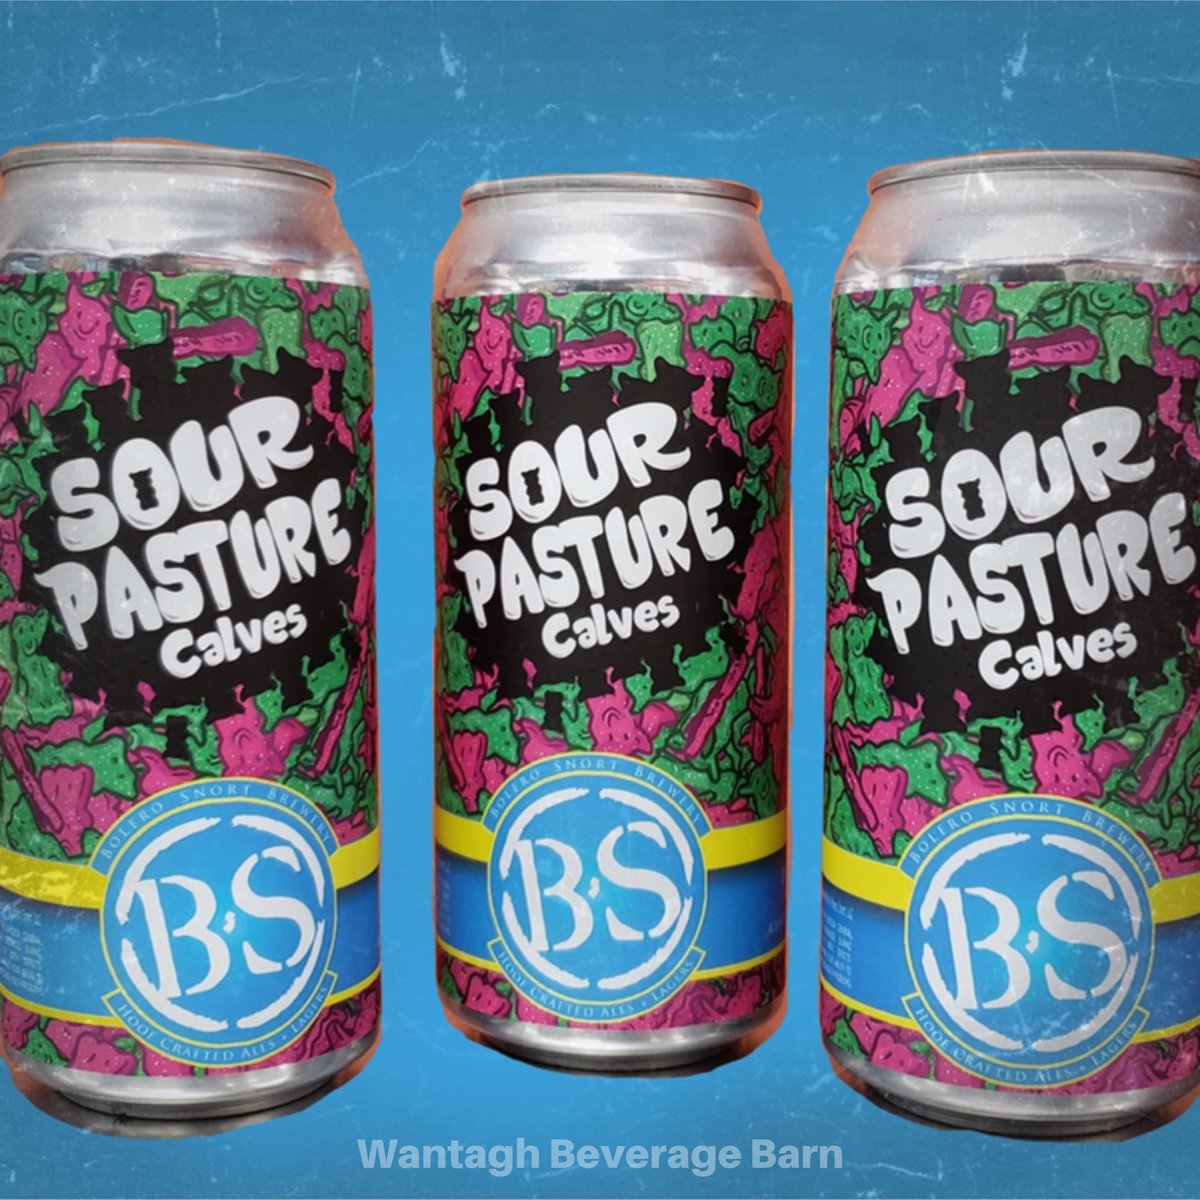 This #tuesday we’re asking #howdoyoubolero 🍺⁉️ We’re taking ours in a SOUR! Raspberry Lime Sour to be exact! New in stock from the amazing brewmasters at #bolerosnortbrewery is a first in their fruited sour beer series - SOUR PASTURE CALVES. First it’s sweet & then it’s sour!